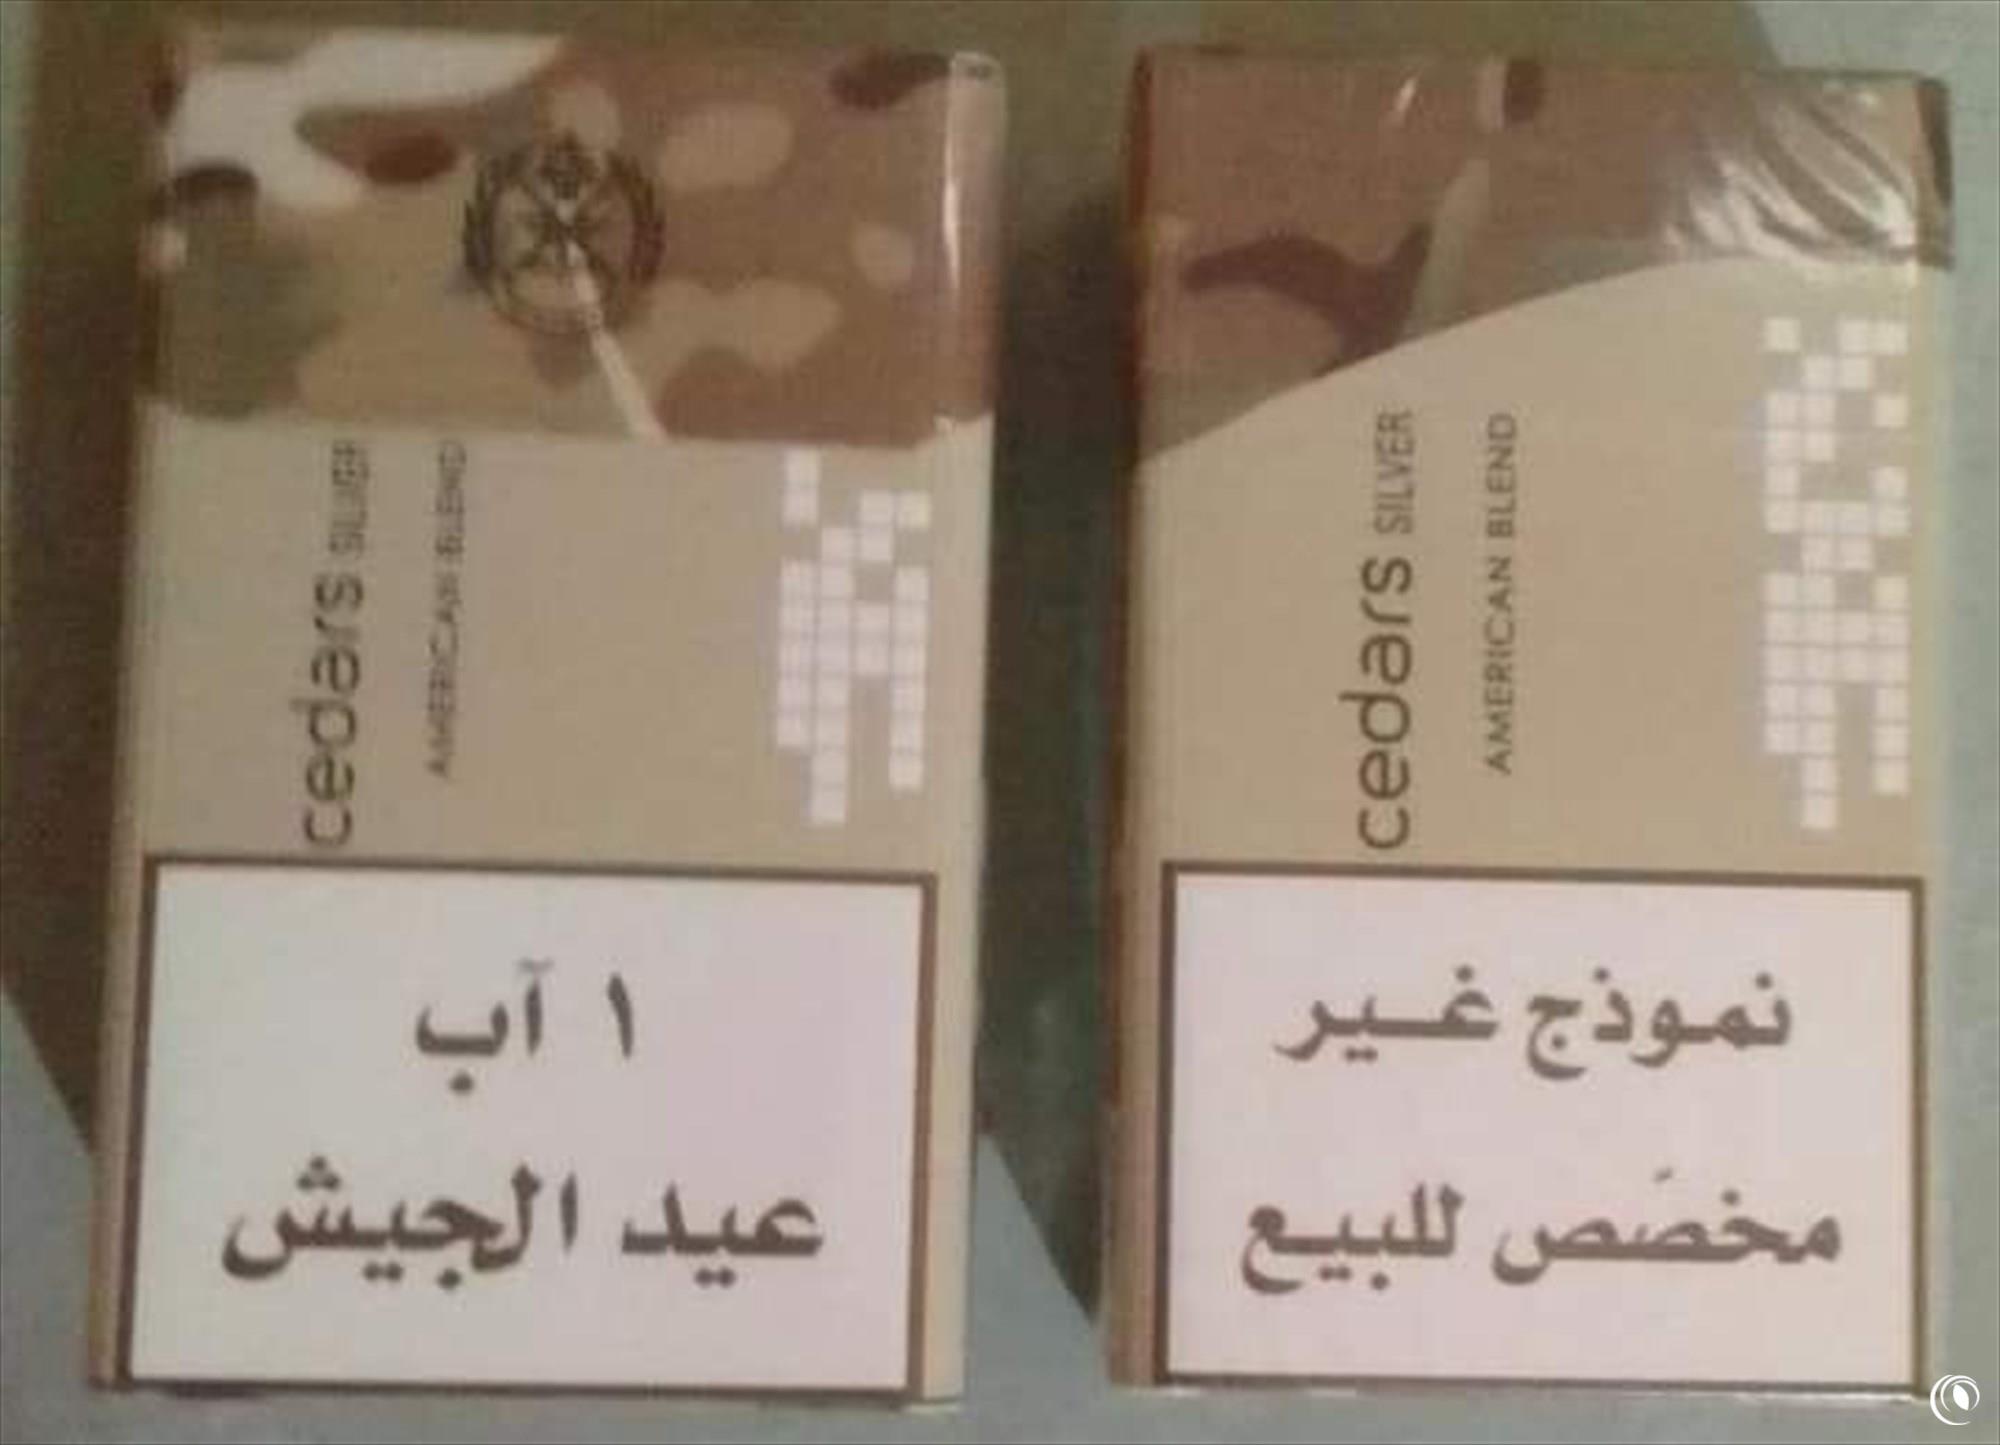 Cigarettes packs not for sale saying “August 1st, Army Day”